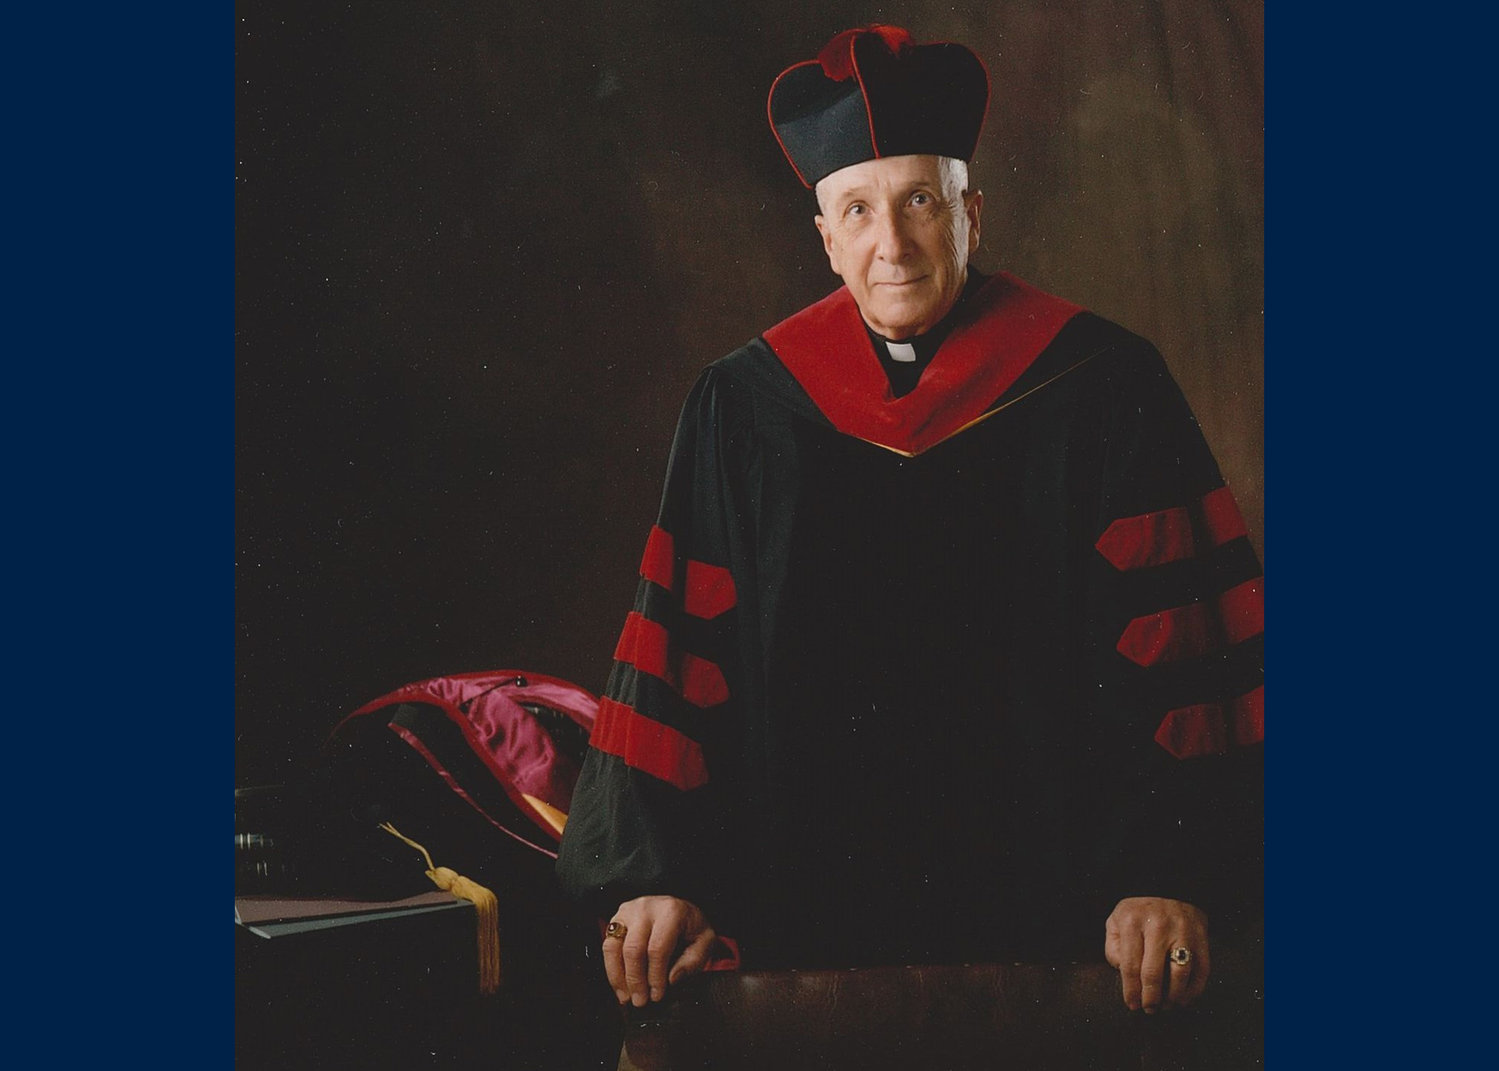 Father George Kramer is photographed while wearing his roman collar and doctoral academic garb.